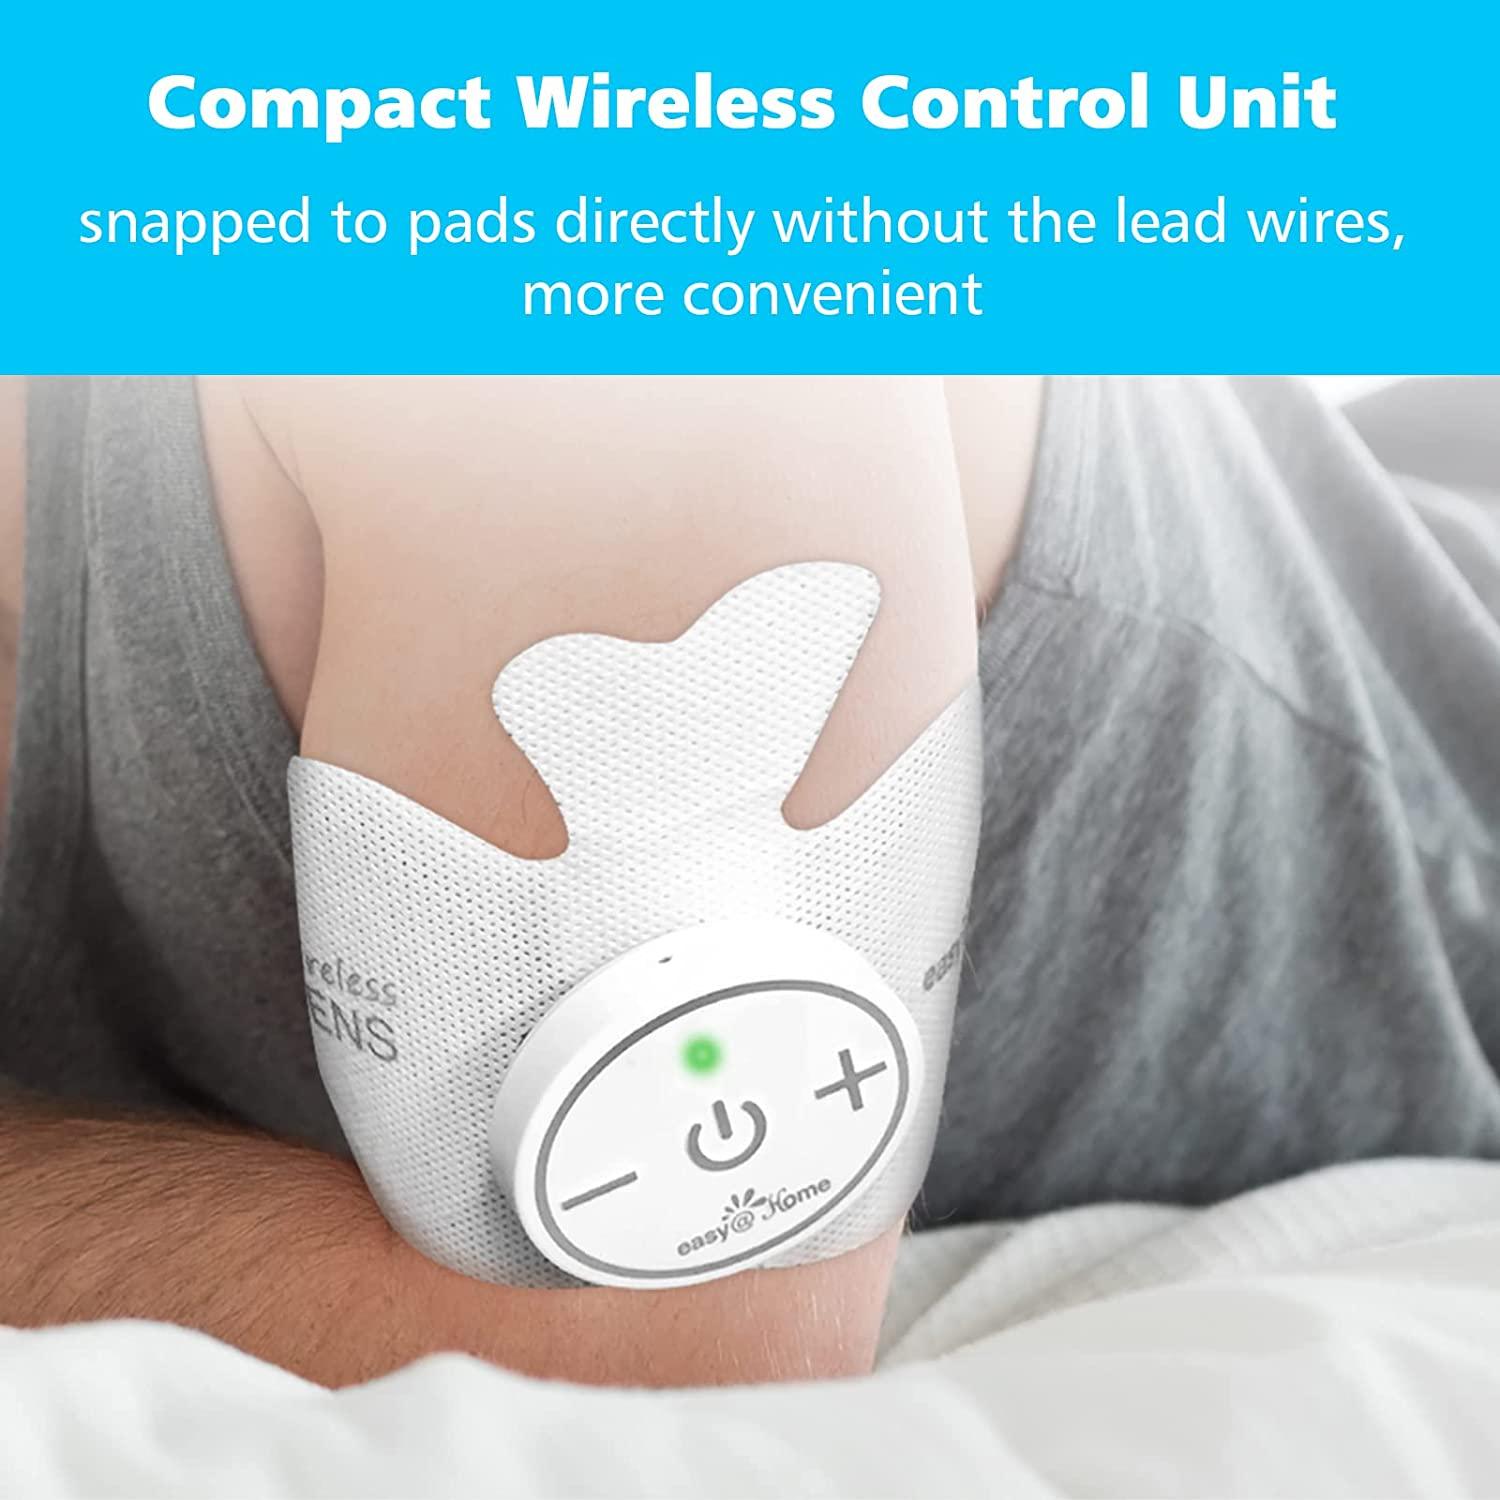 Easy@Home Rechargeable Compact Wireless TENS Unit - 510K Cleared, FSA